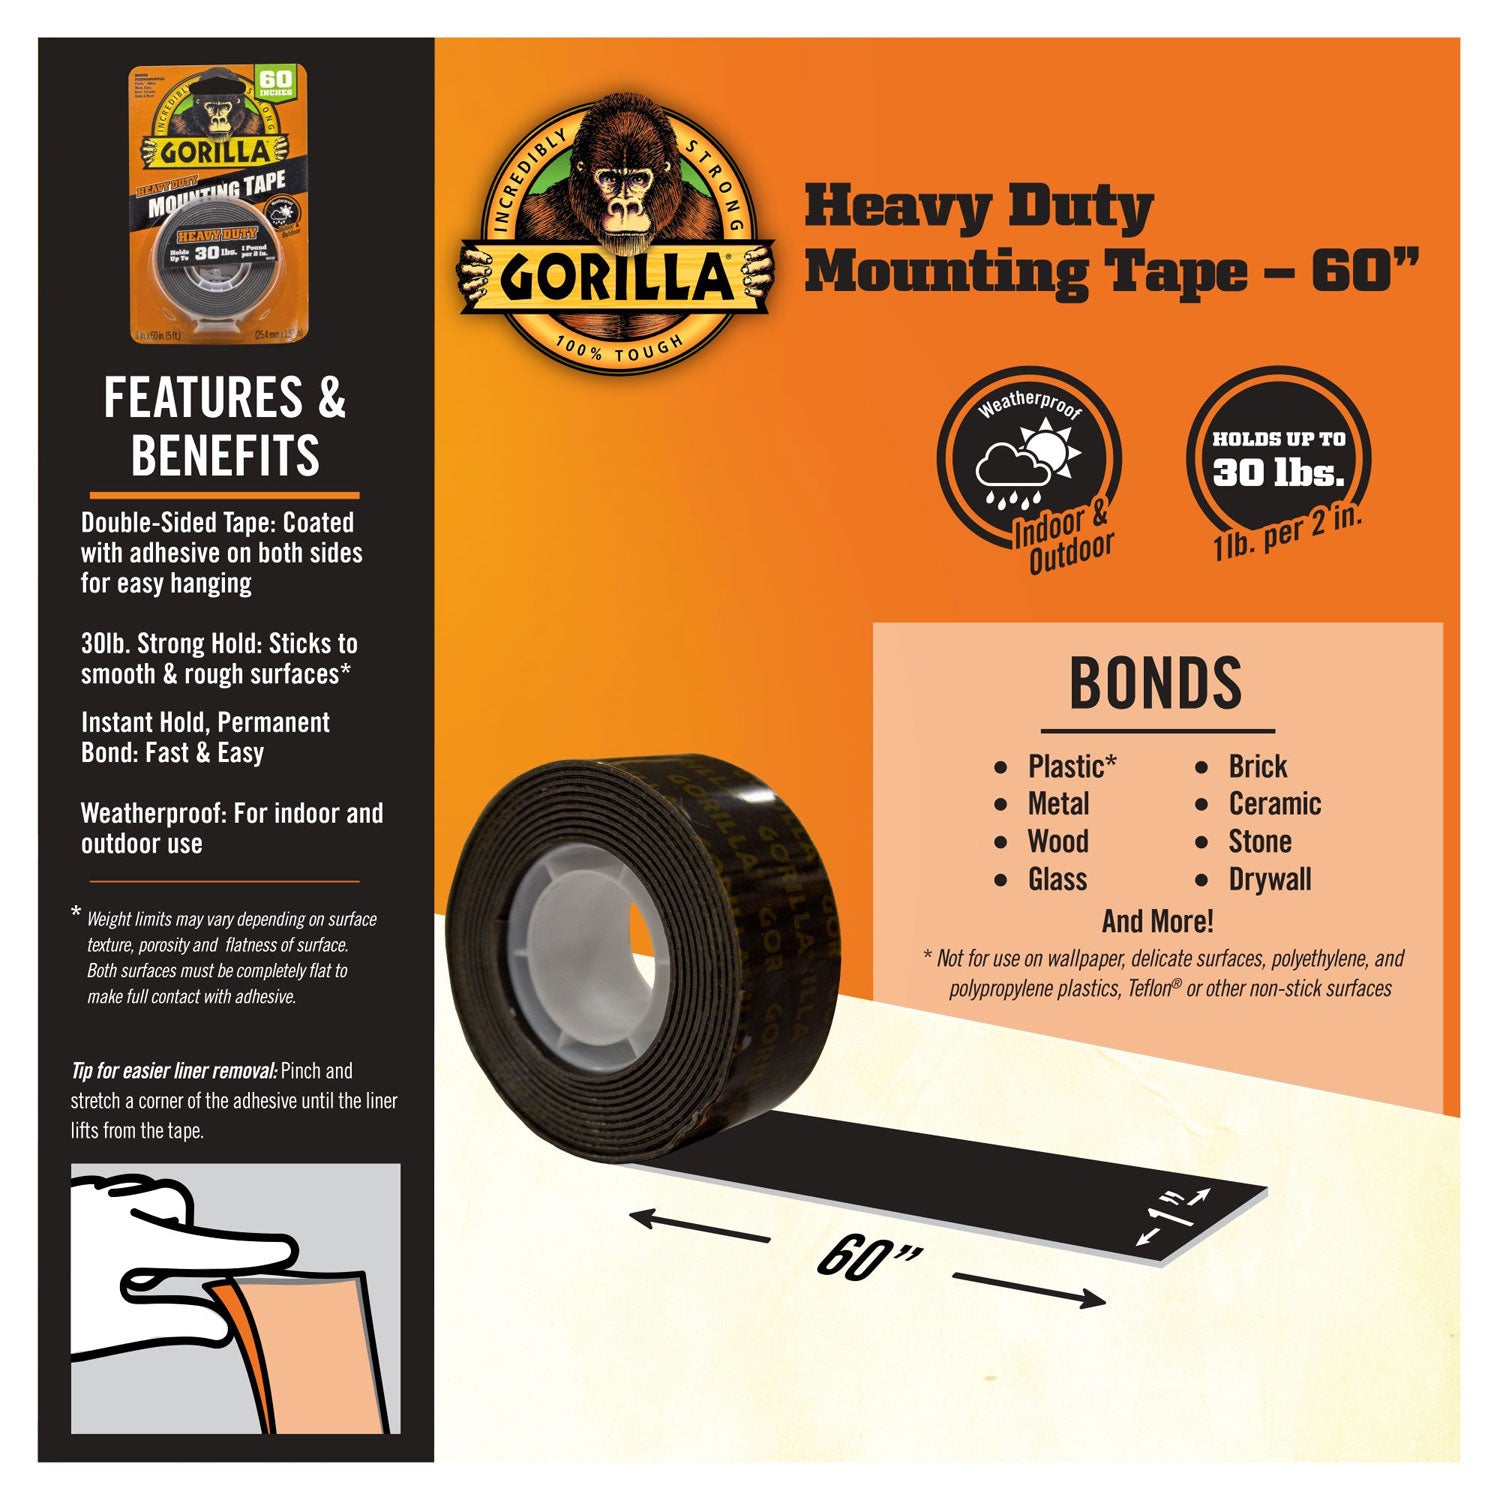 heavy-duty-mounting-tape-permanent-holds-up-to-30-lbs-1-x-60-black_gor6055002 - 2